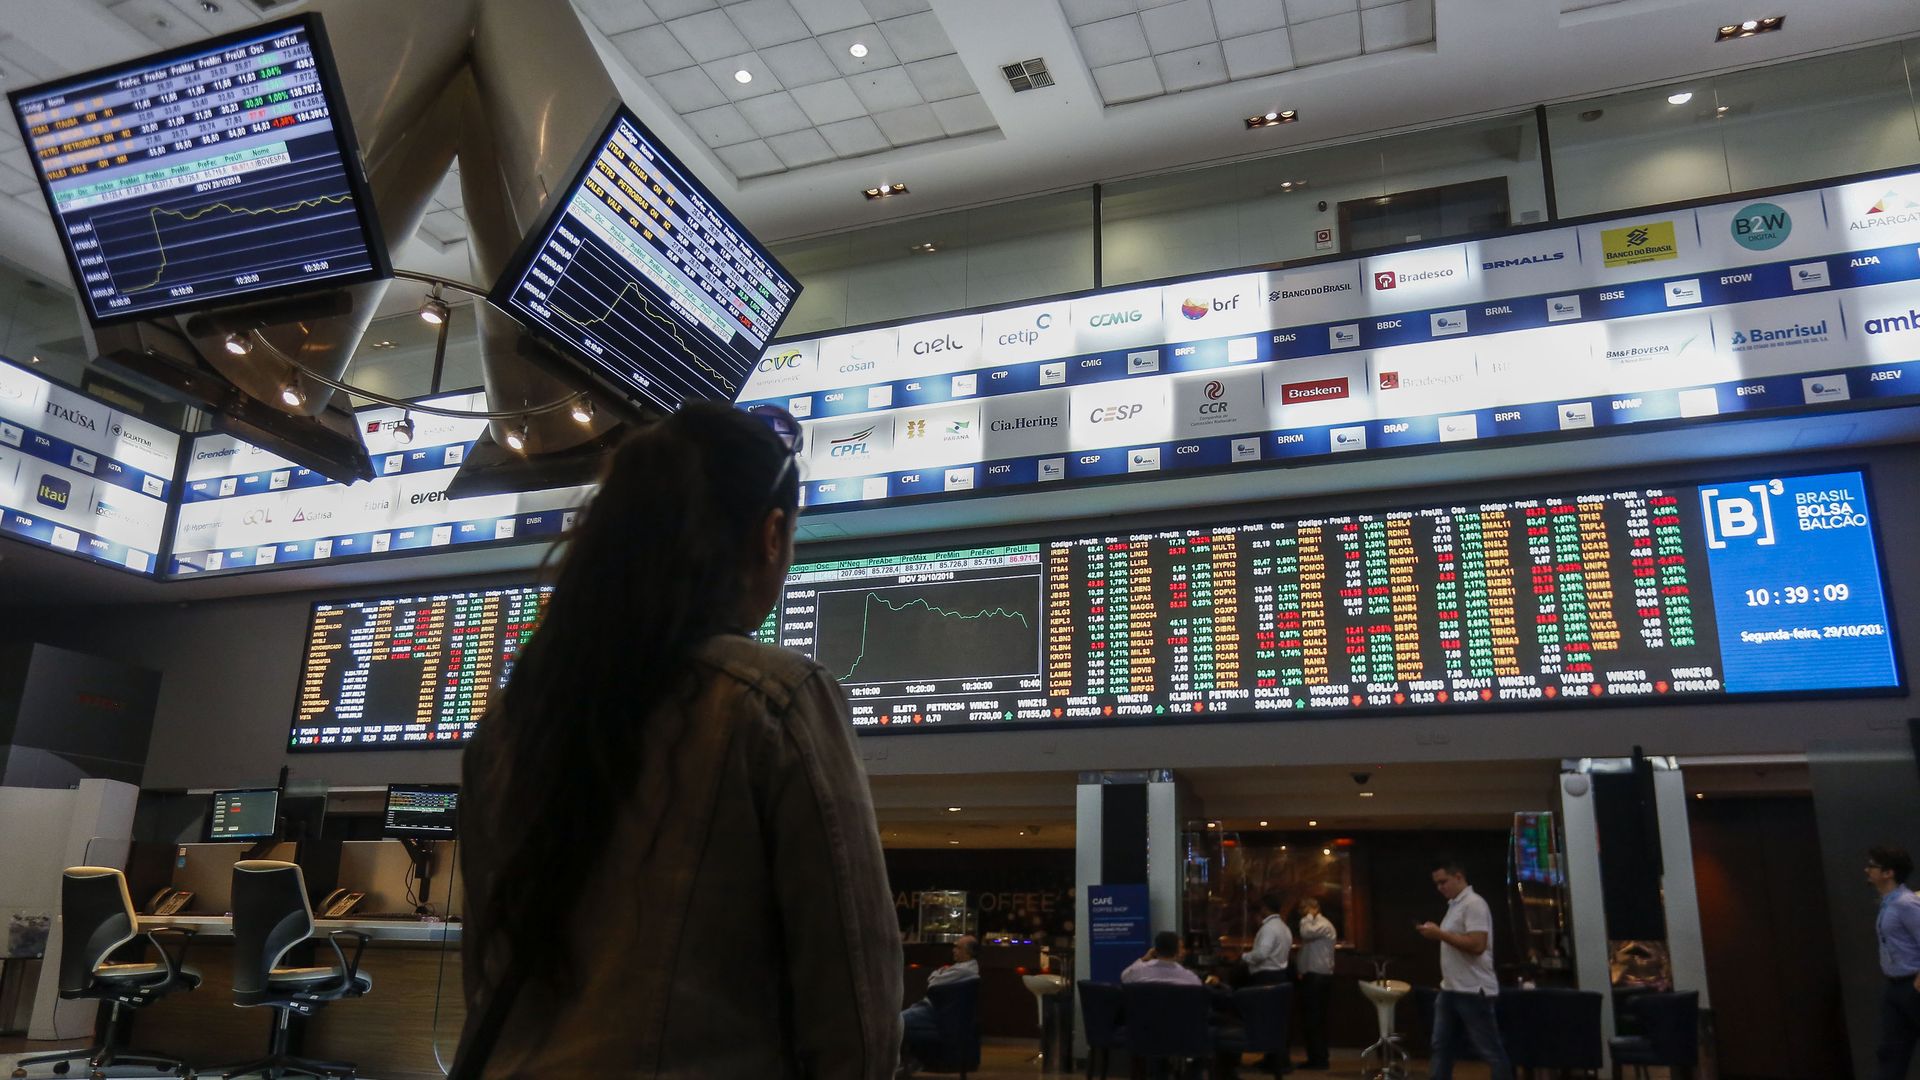 Picture taken at Sao Paulo's Stocks Exchange (Bovespa) headquarters in downtown Sao Paulo, Brazil on October 29, 2018. 